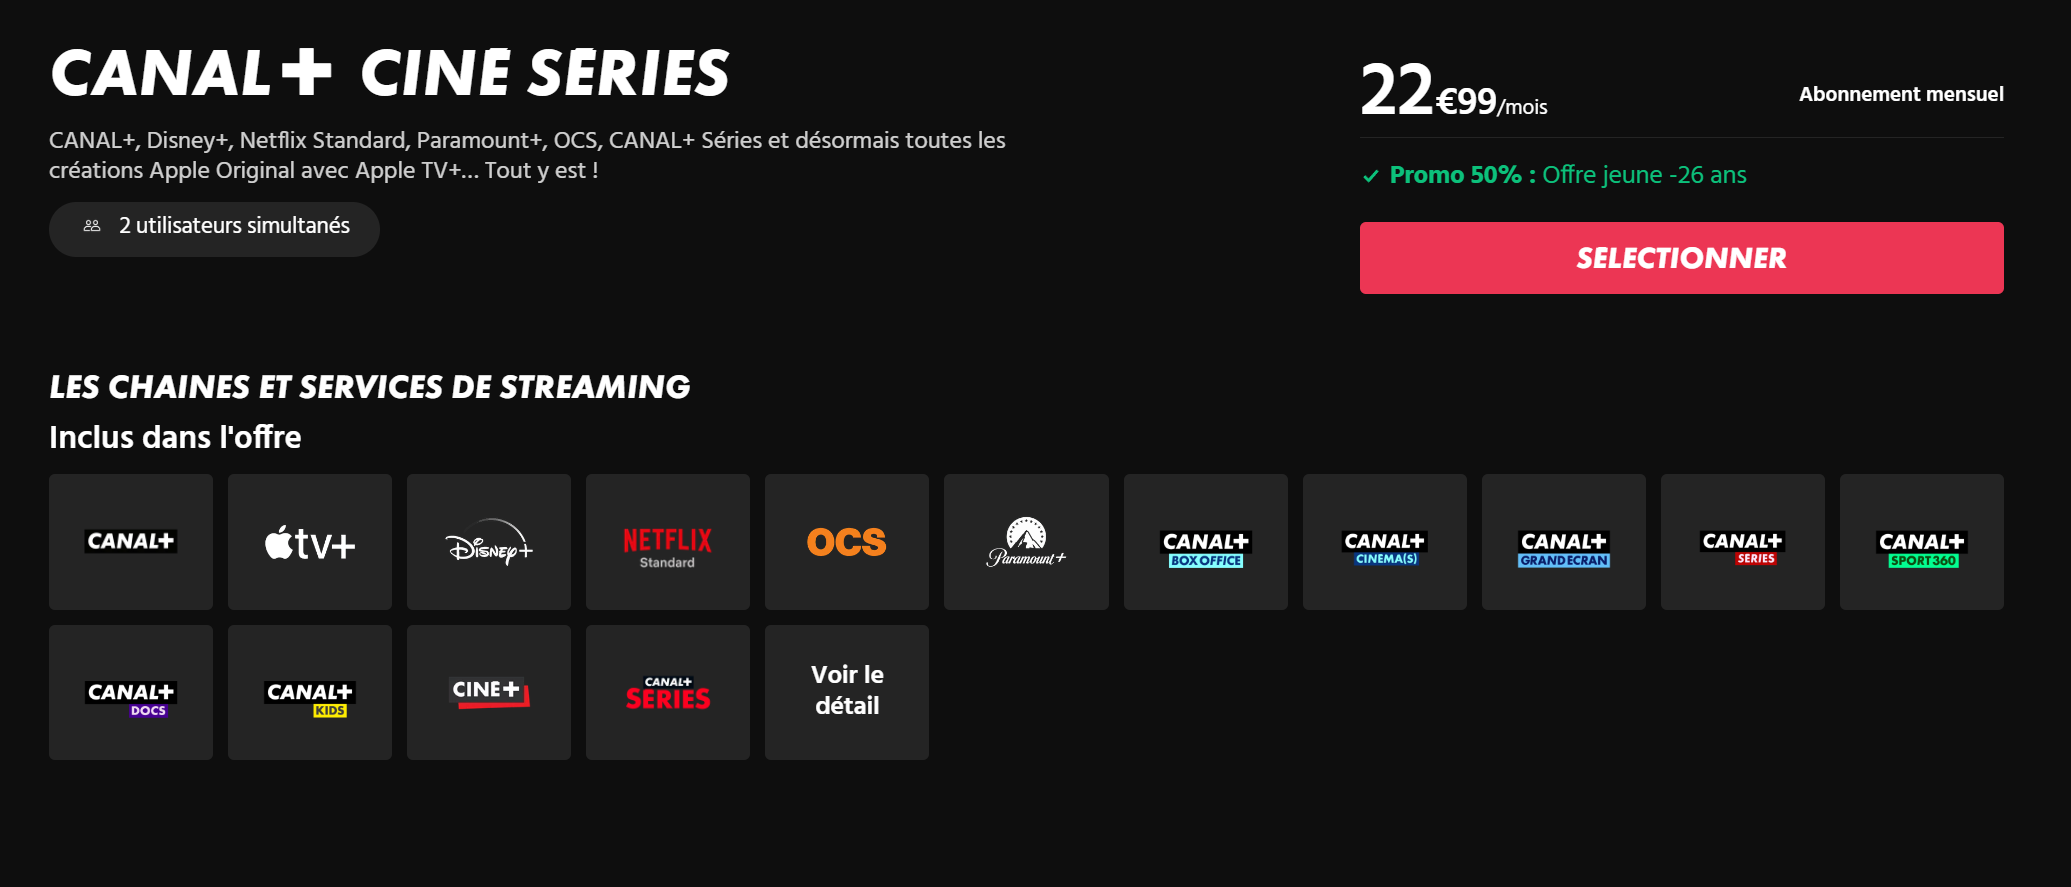 canal+ cine series offre